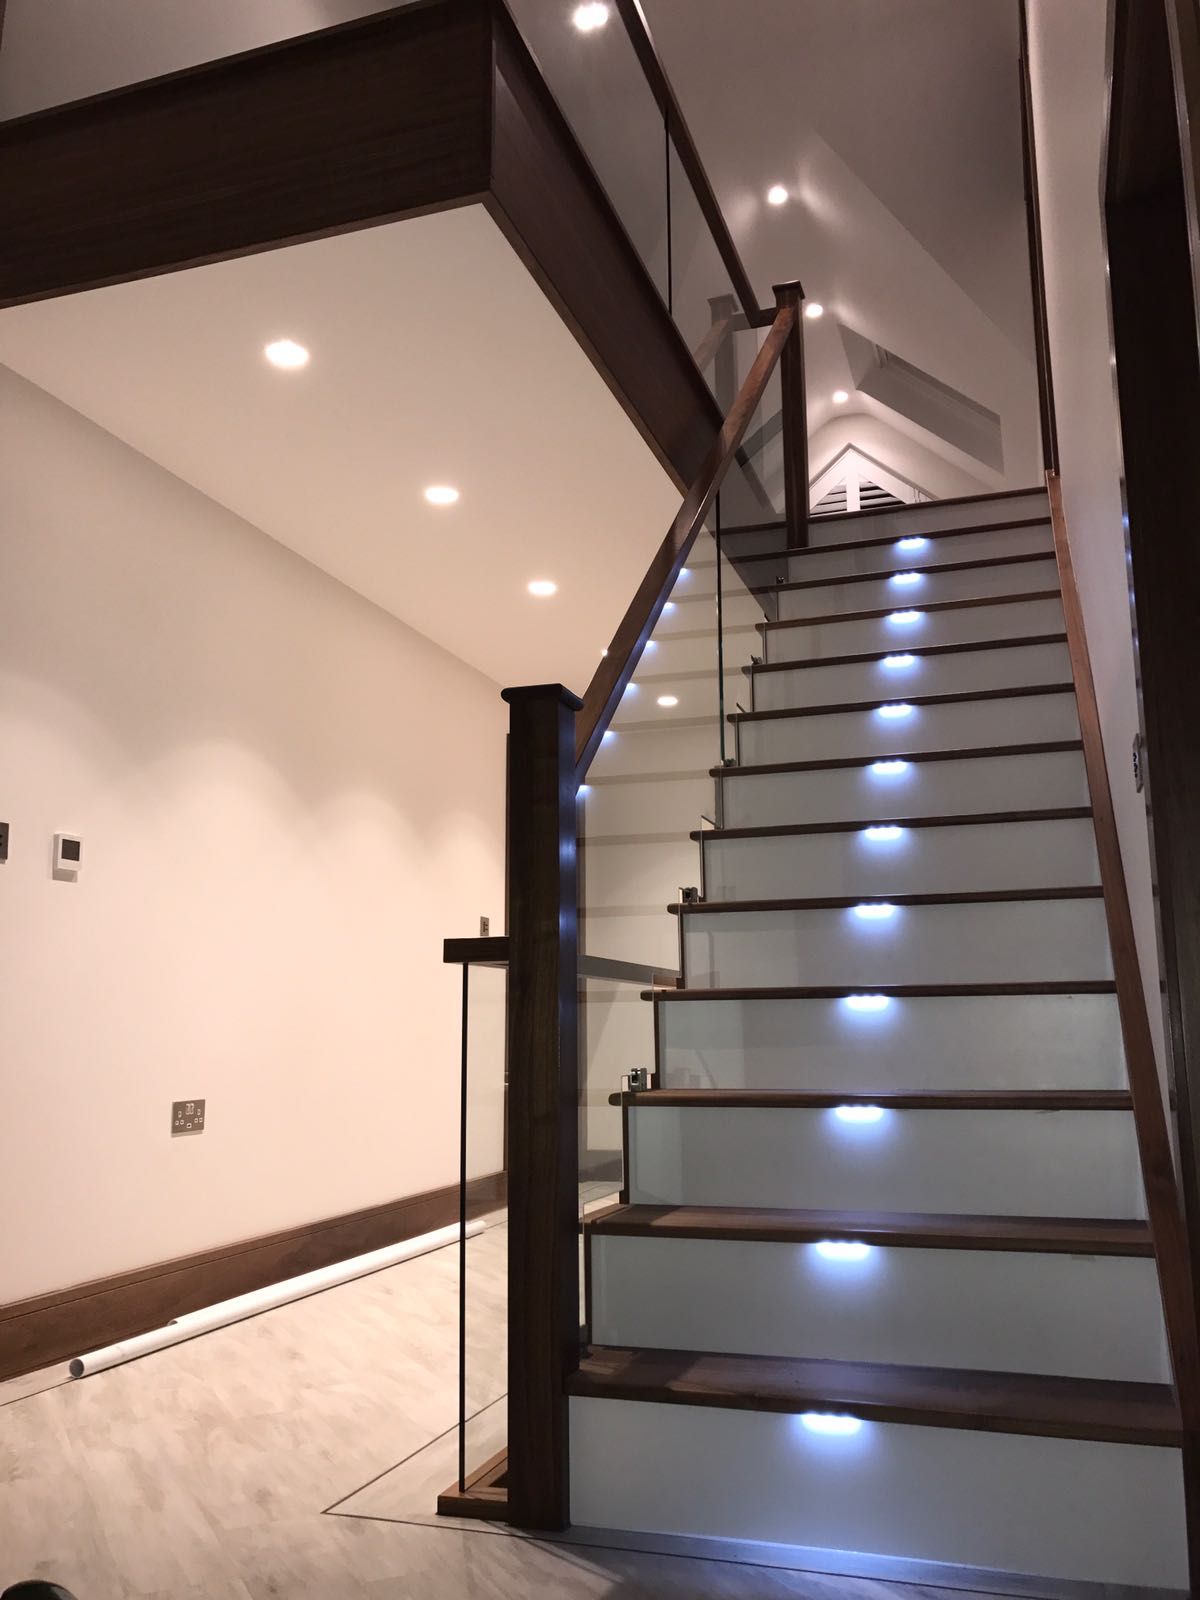 Smart Stair Lights - Intelligent stair led lights turn on when you walk